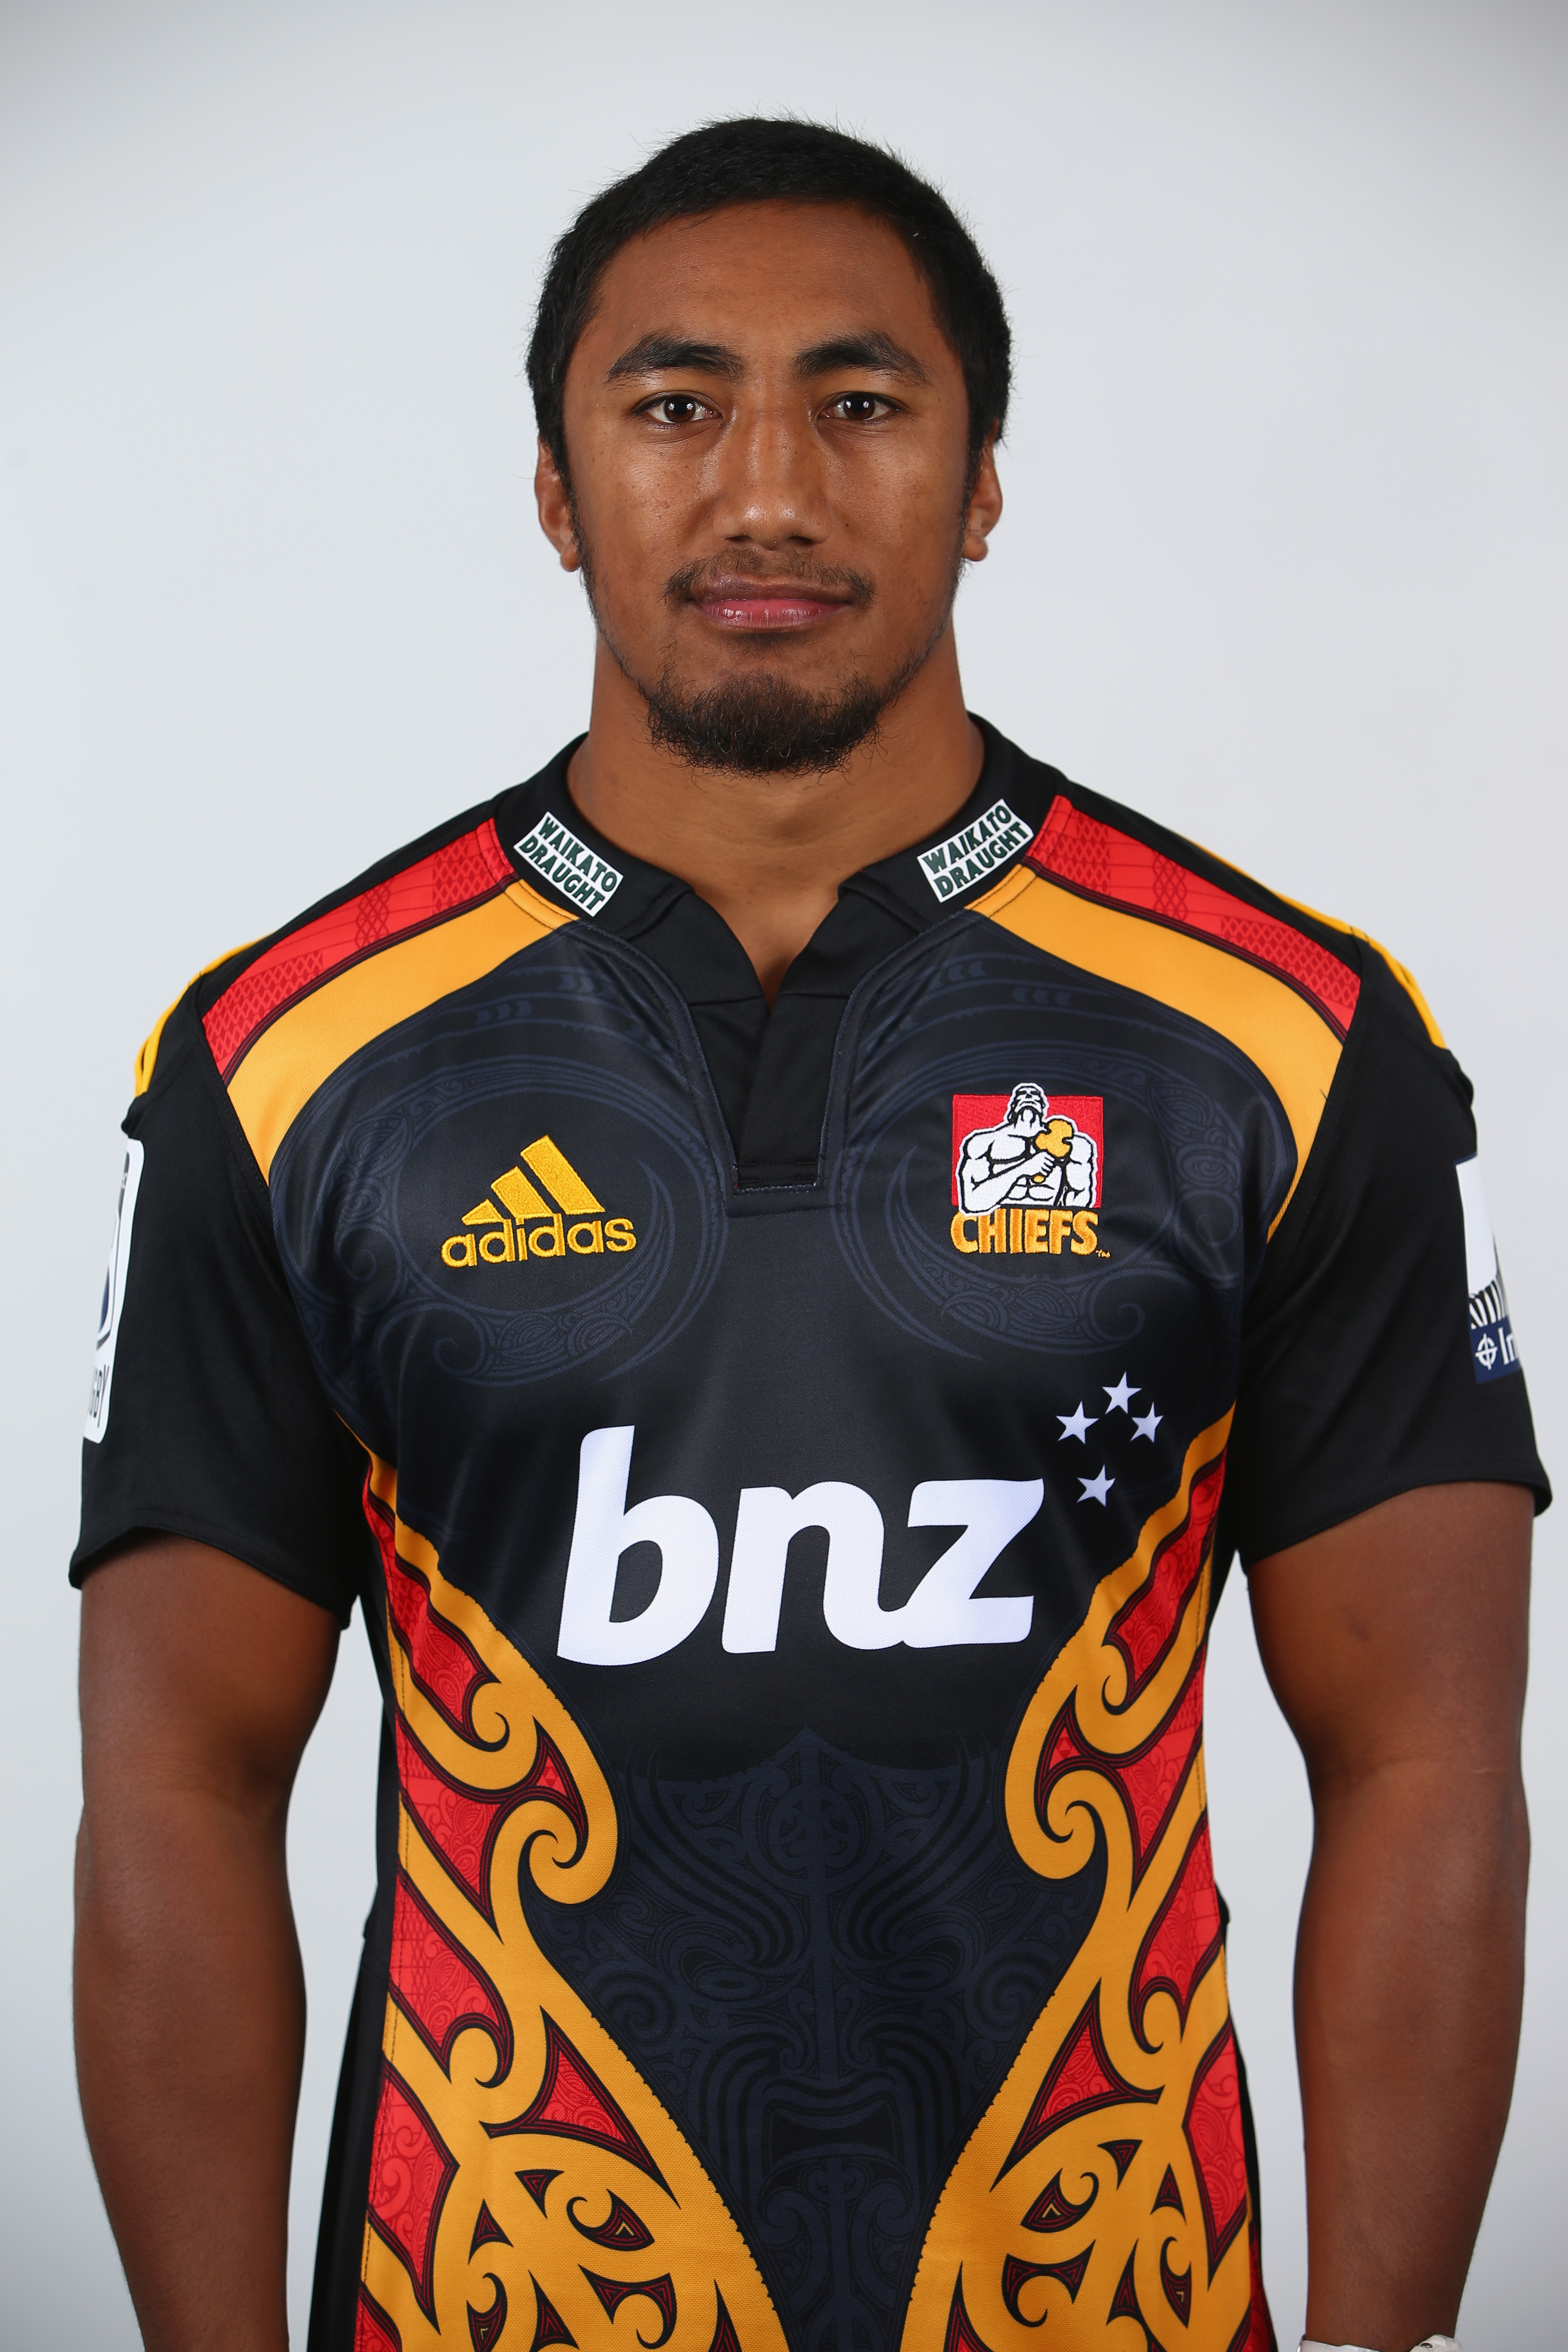 HAMILTON, NEW ZEALAND - JANUARY 29: Bundee Aki of the Chiefs poses during a Chiefs Super Rugby headshots session on January 29, 2014 in Hamilton, New Zealand. (Photo by Phil Walter/Getty Images)